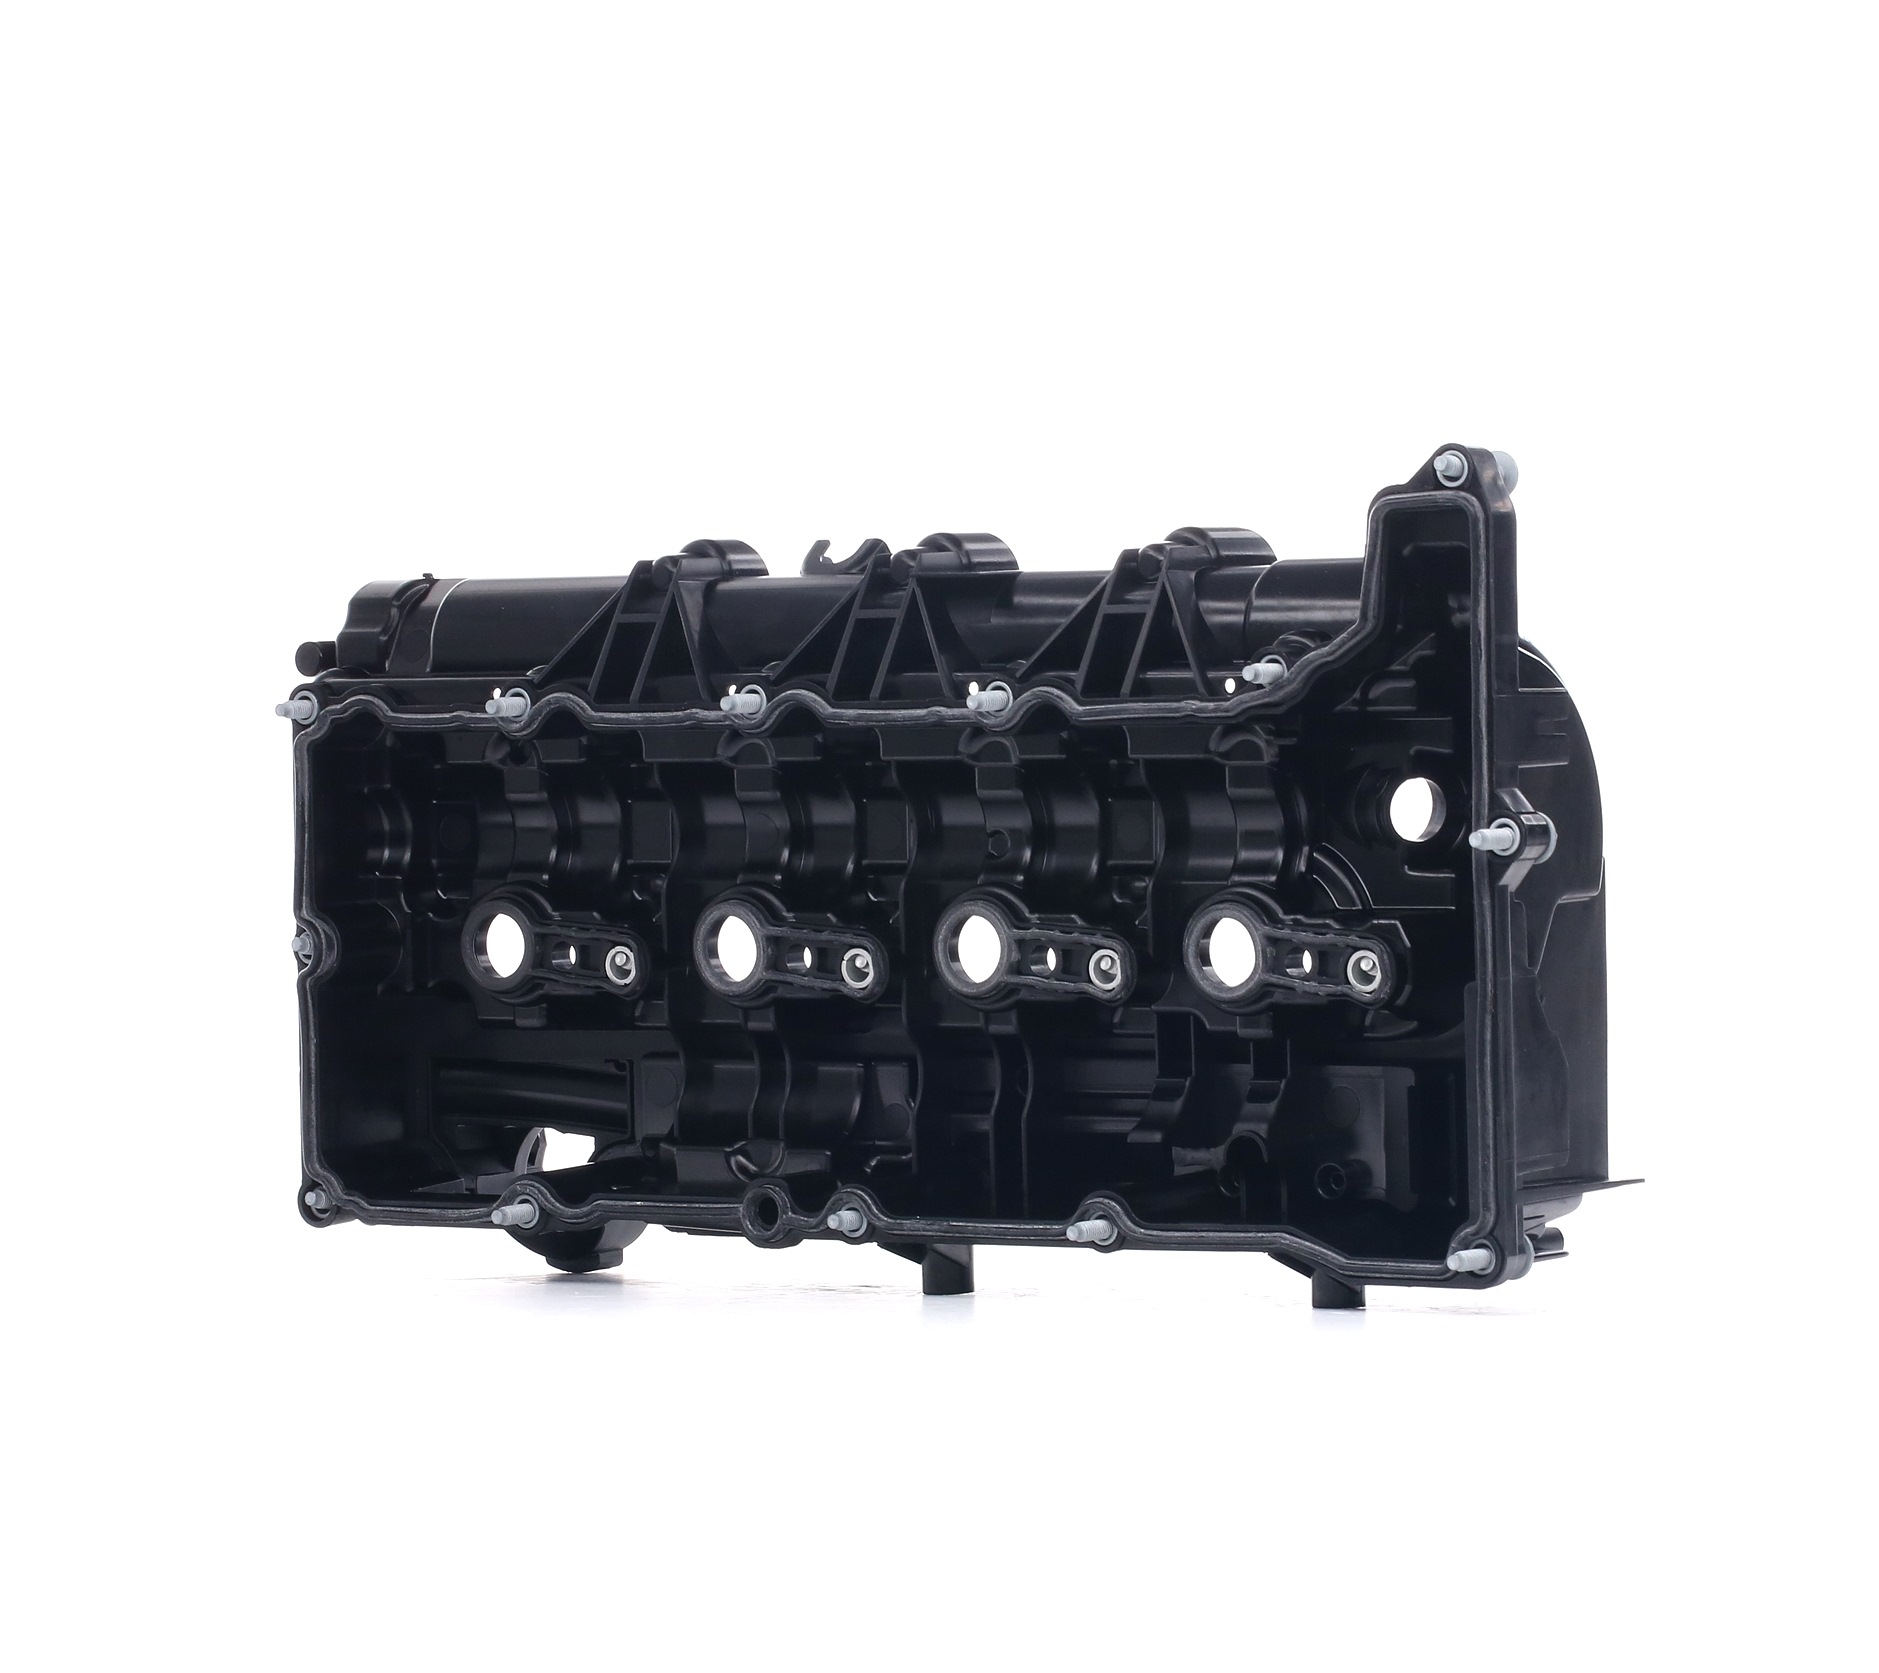 Image of FAI AutoParts Rocker Cover BMW,TOYOTA,MINI VC011 11127810584,11128511814,11128570828 Valve Cover,Camshaft Cover 11128589941